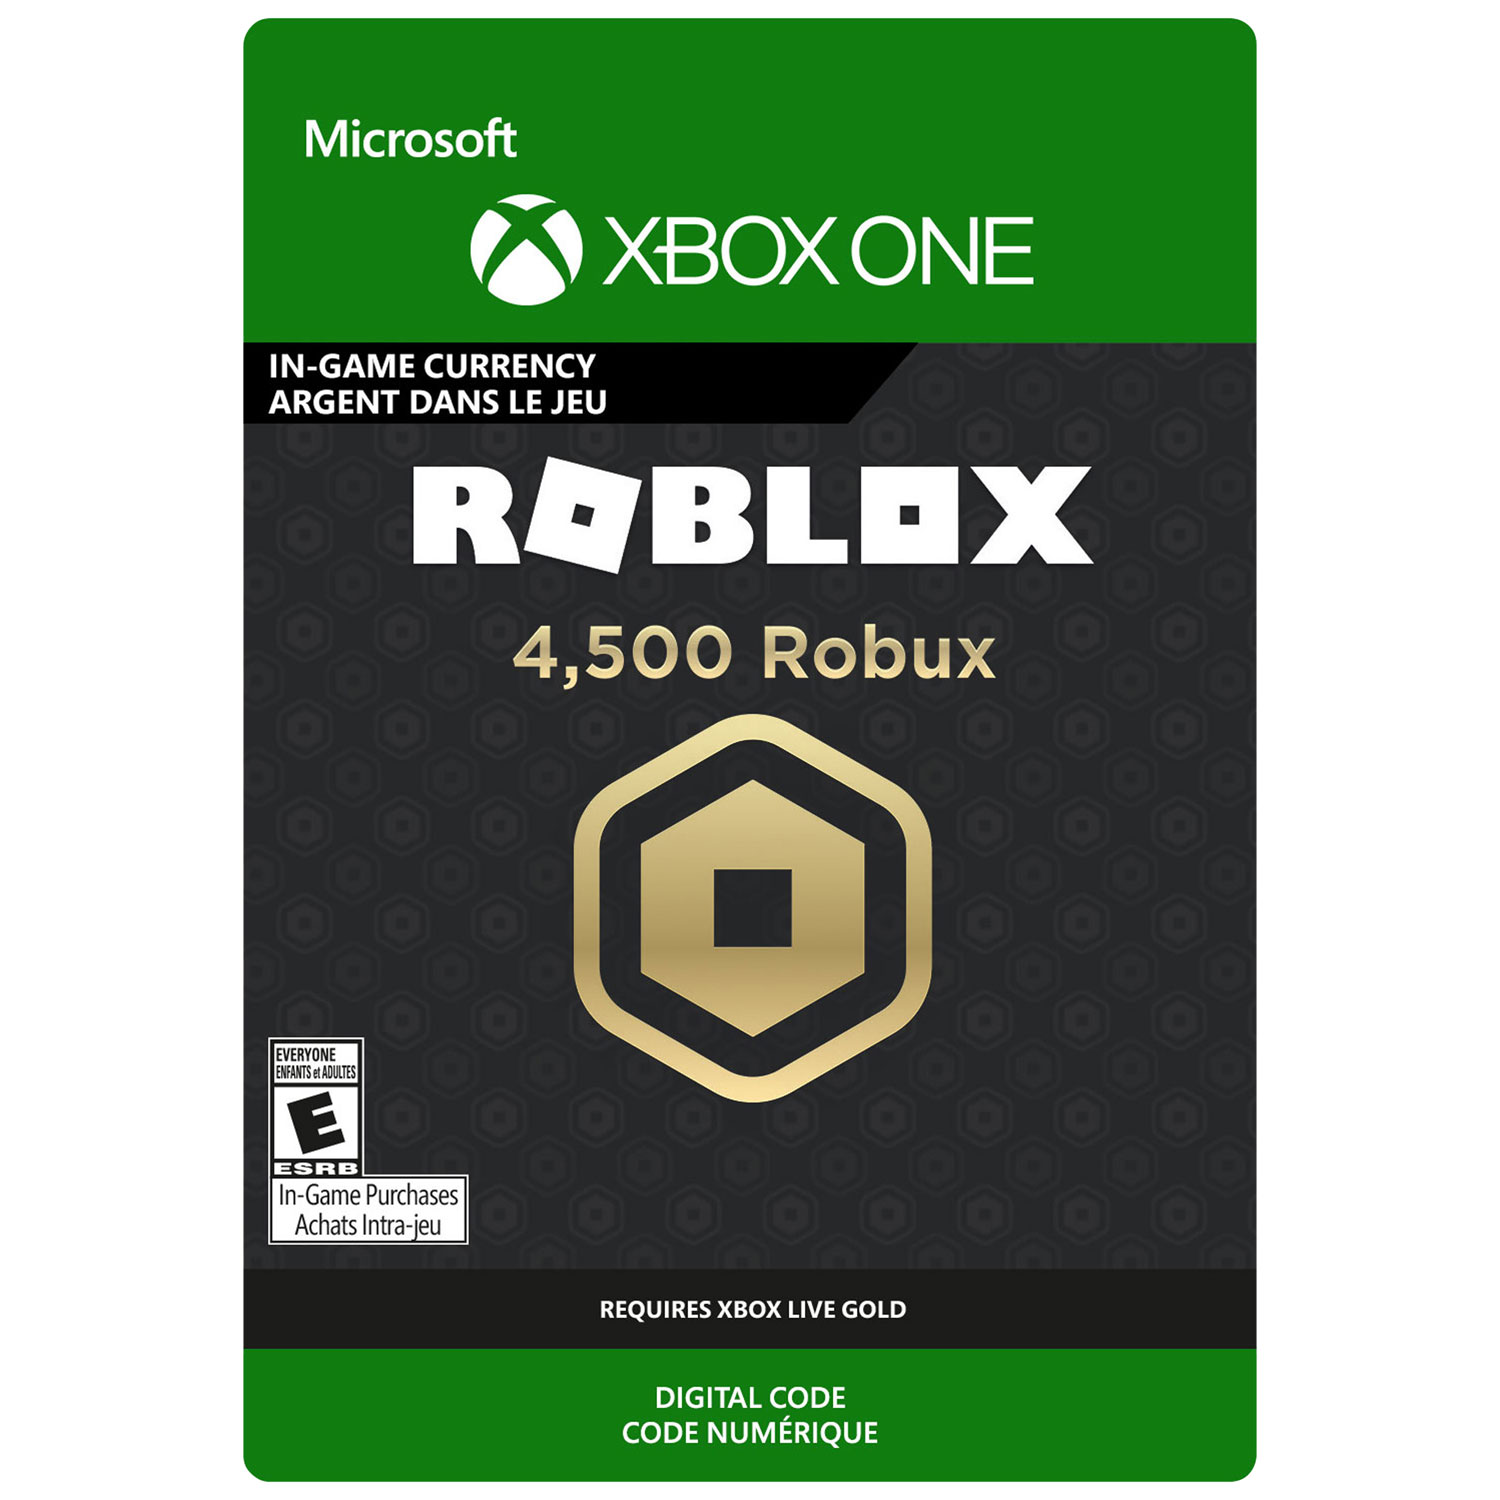 Roblox 4,500 Robux (Xbox One) - Digital Download